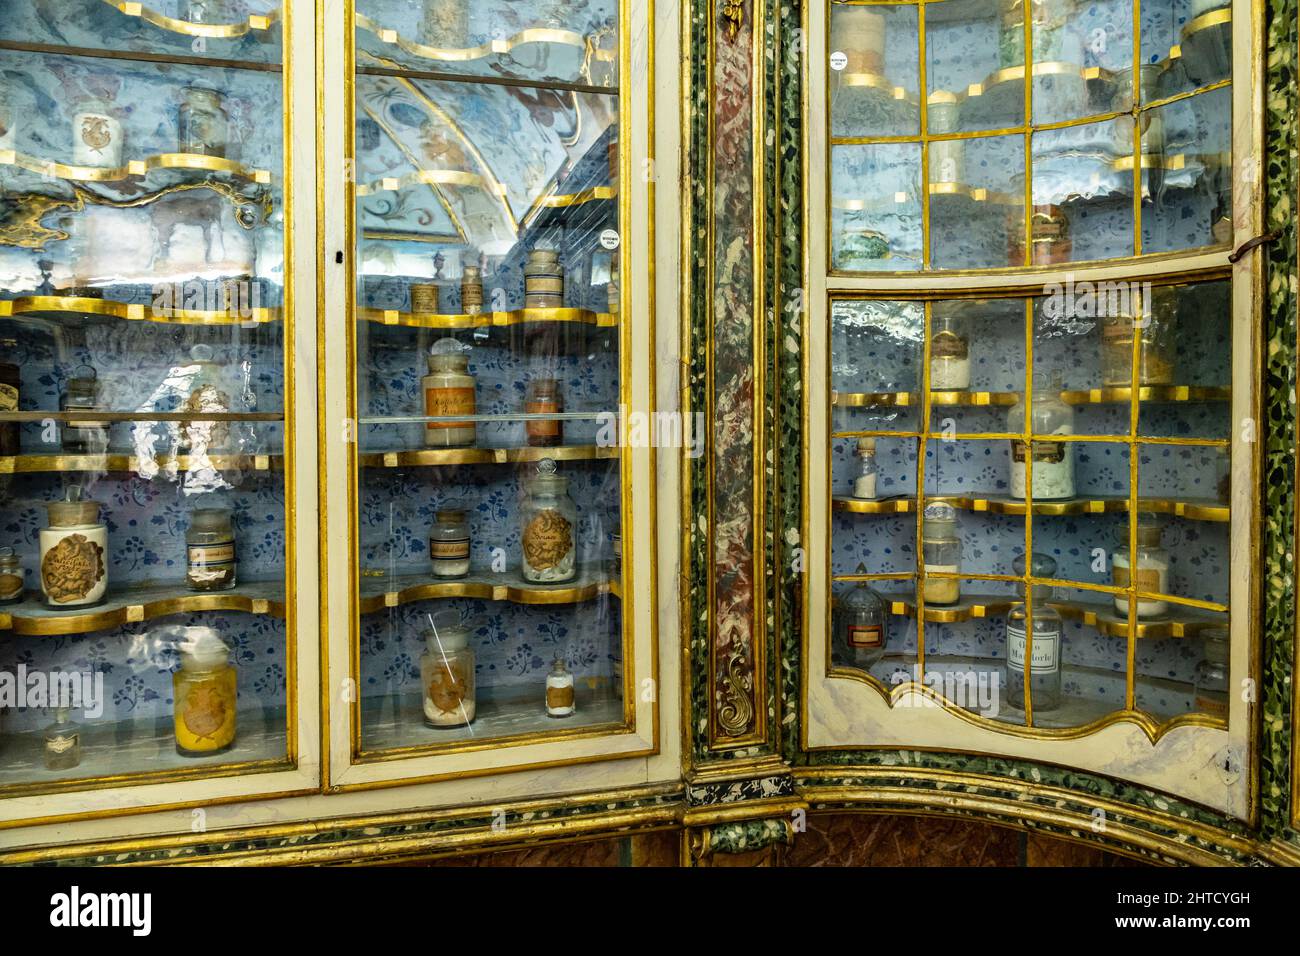 Showcases containing spices and medicines in the ancient pharmacy of the Certosa di Trisulti. Collepardo, province of Frosinone, Lazio, Italy, Europe Stock Photo